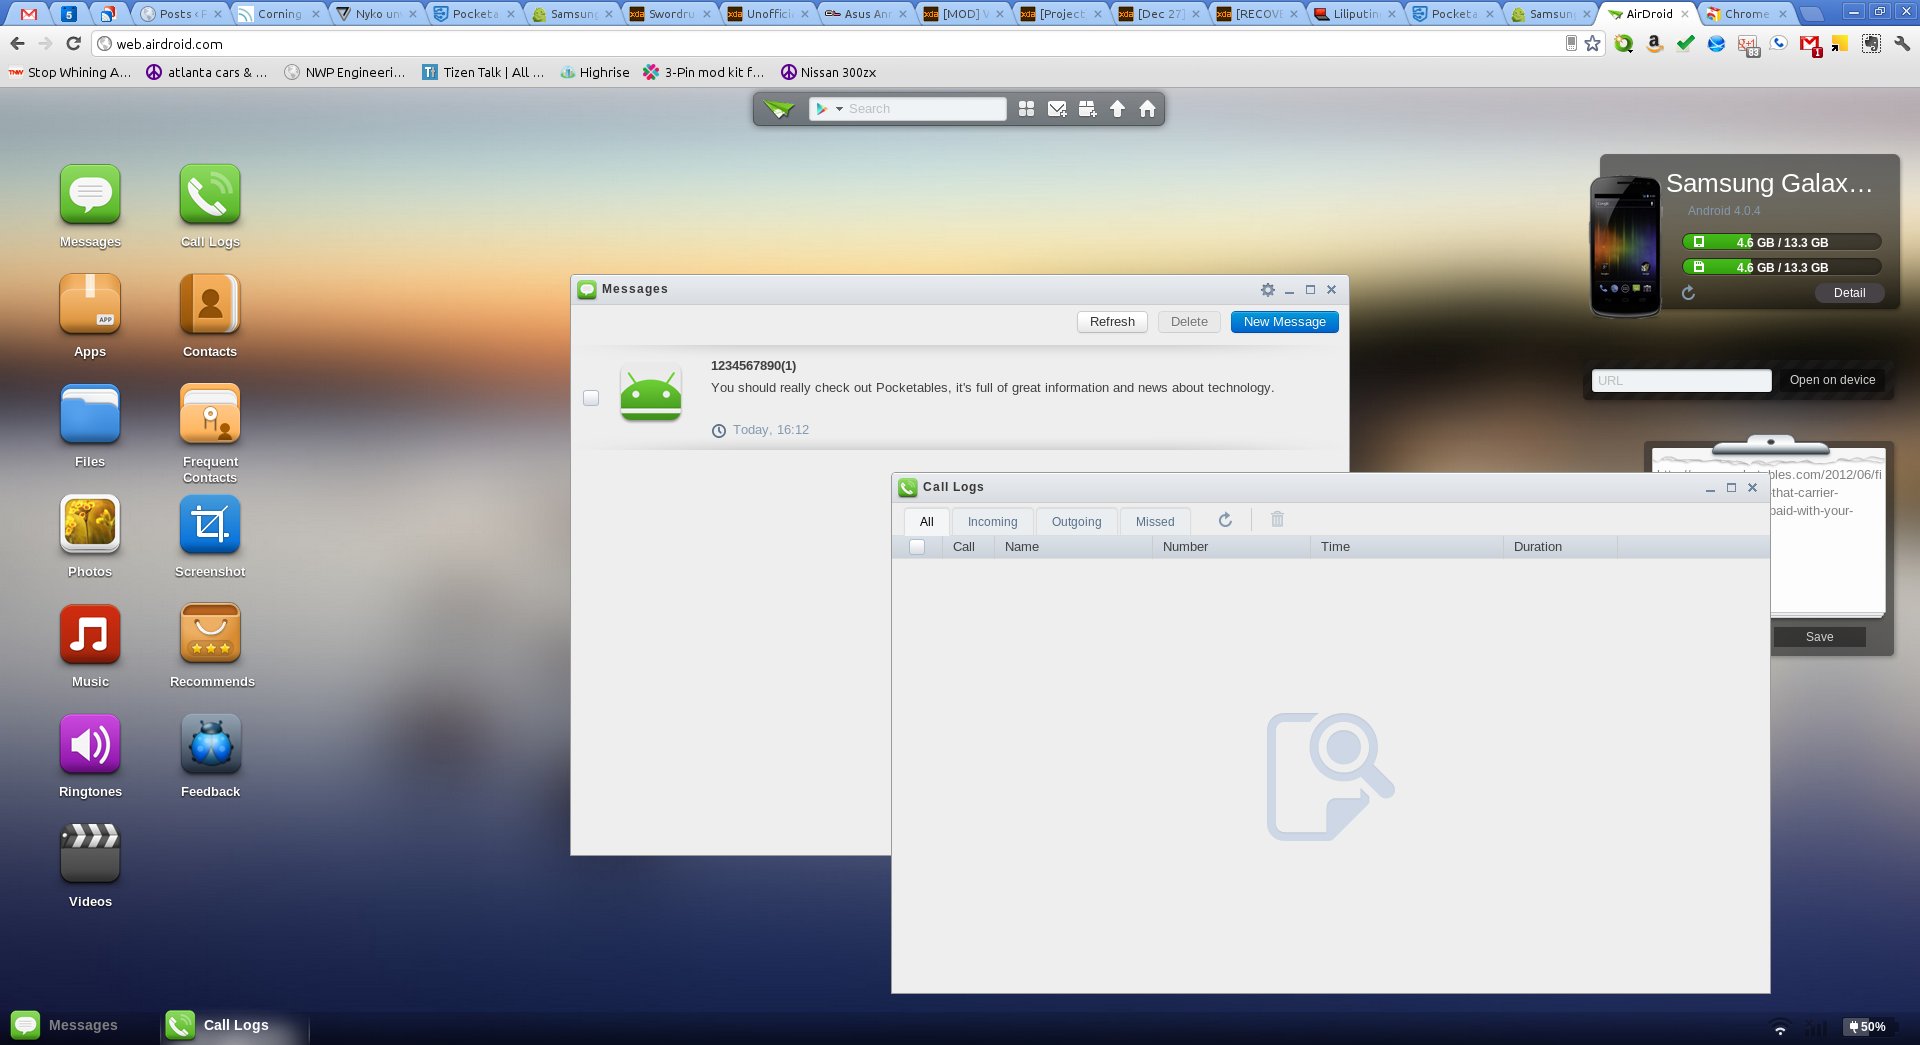 airdroid pc4 - for some reason we don't have an alt tag here